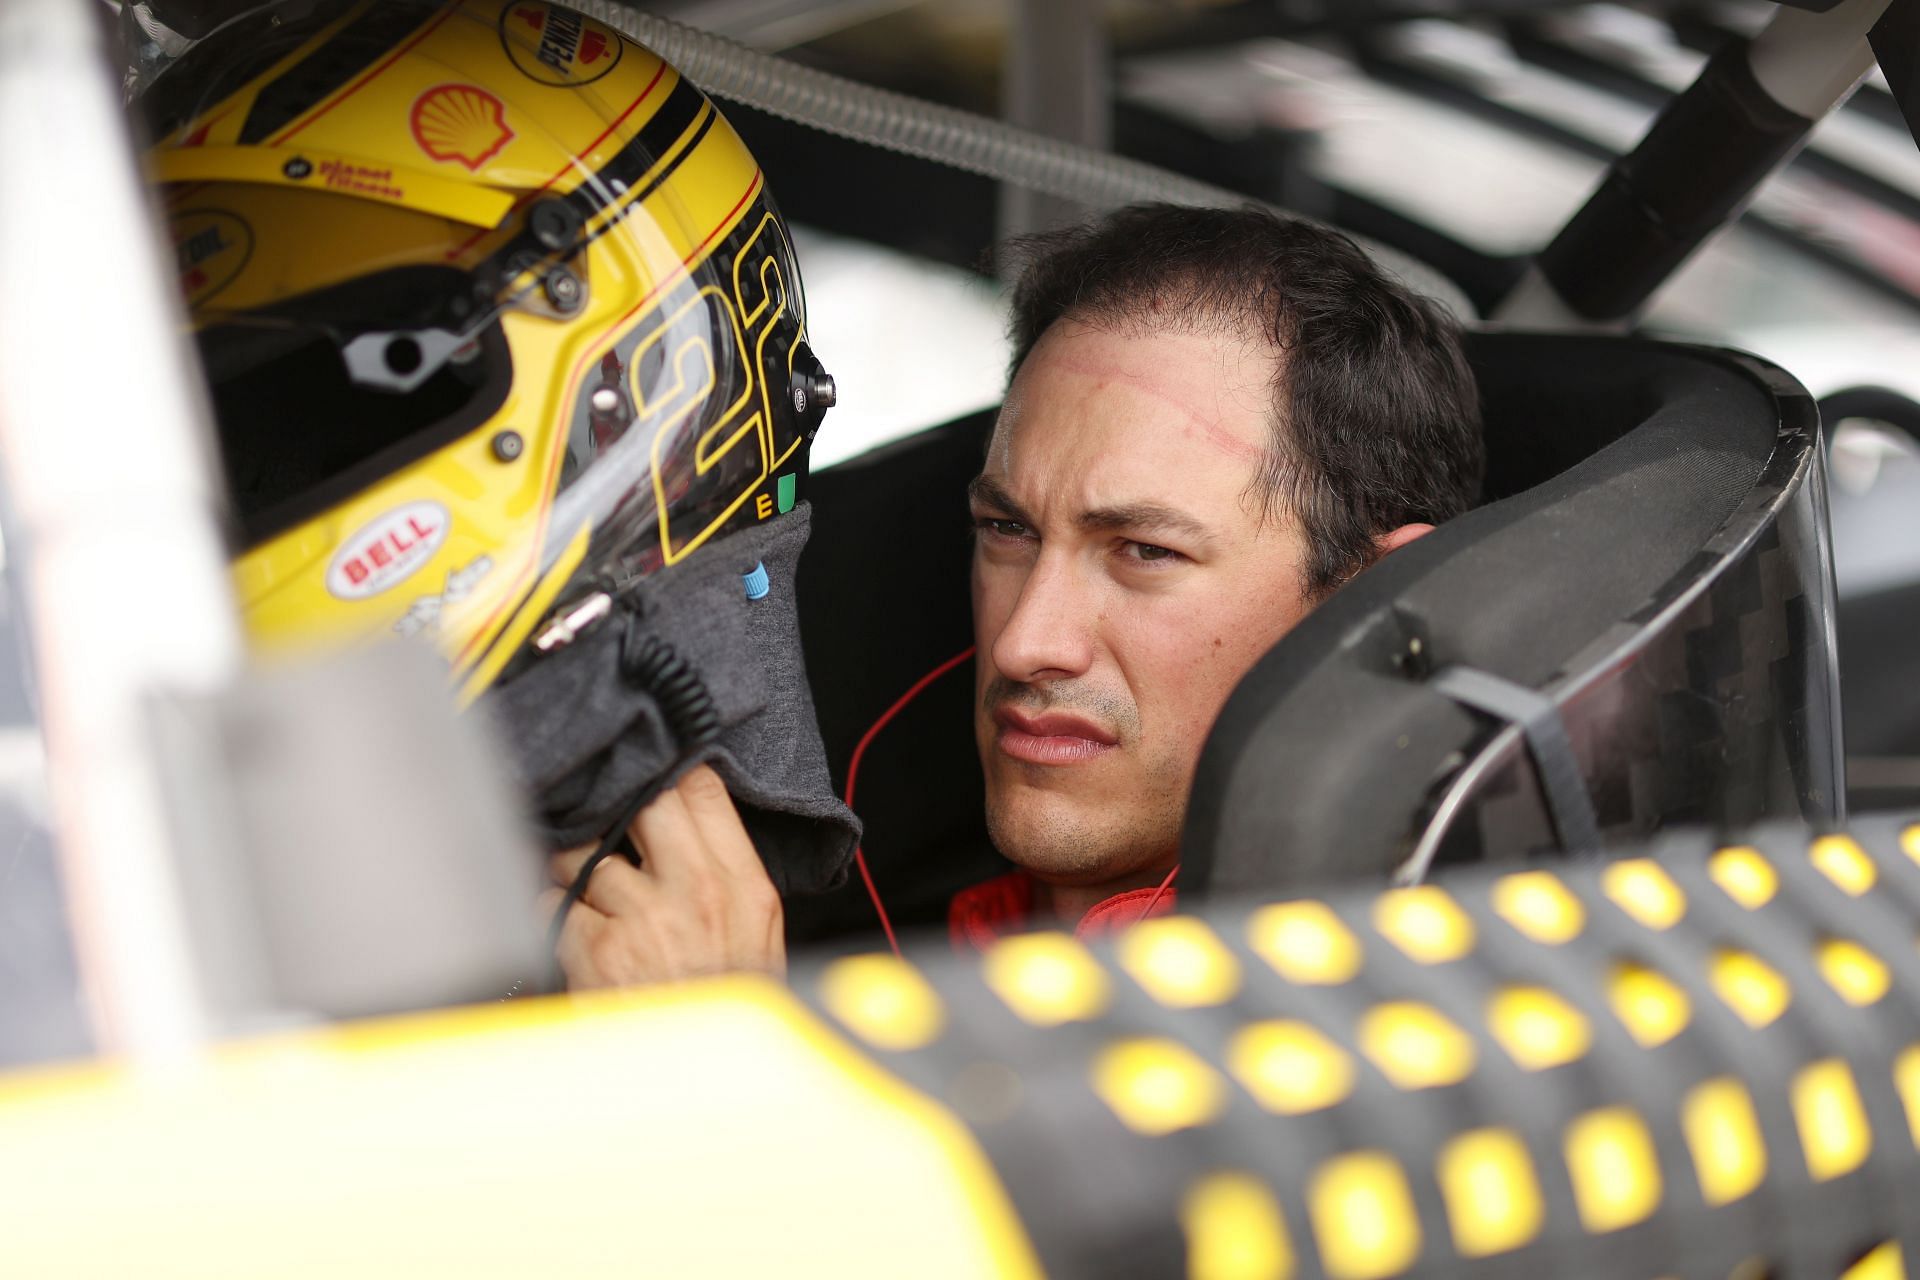 Joey Logano sits in his car during qualifying for the 2022 NASCAR Cup Series Ambetter 301 at New Hampshire Motor Speedway in Loudon, New Hampshire. (Photo by James Gilbert/Getty Images)